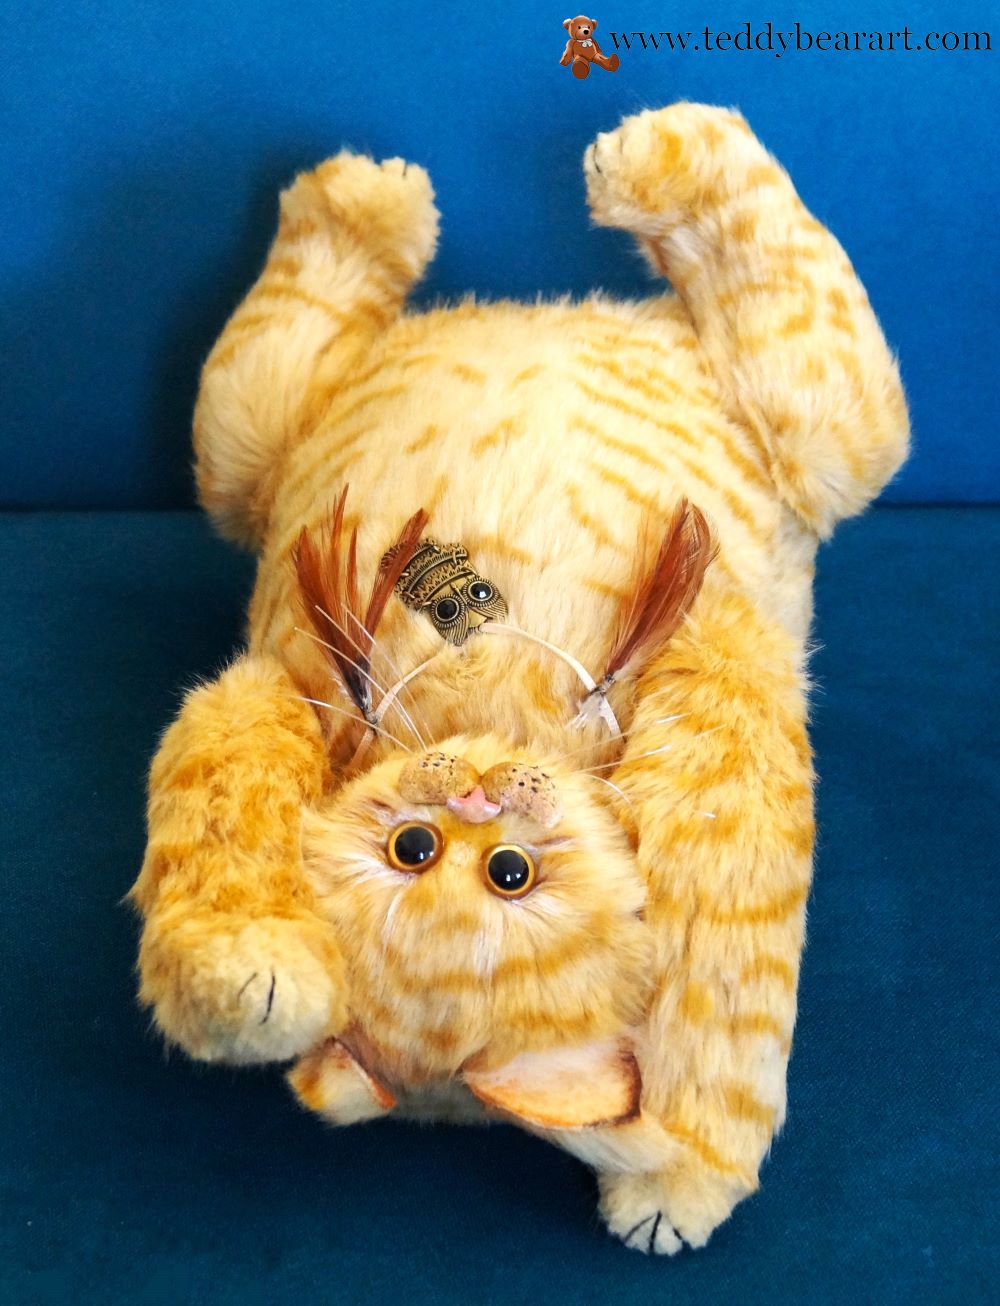 Purr-fect Gift: Making a Teddy Toy from a Free Cat Sewing Pattern